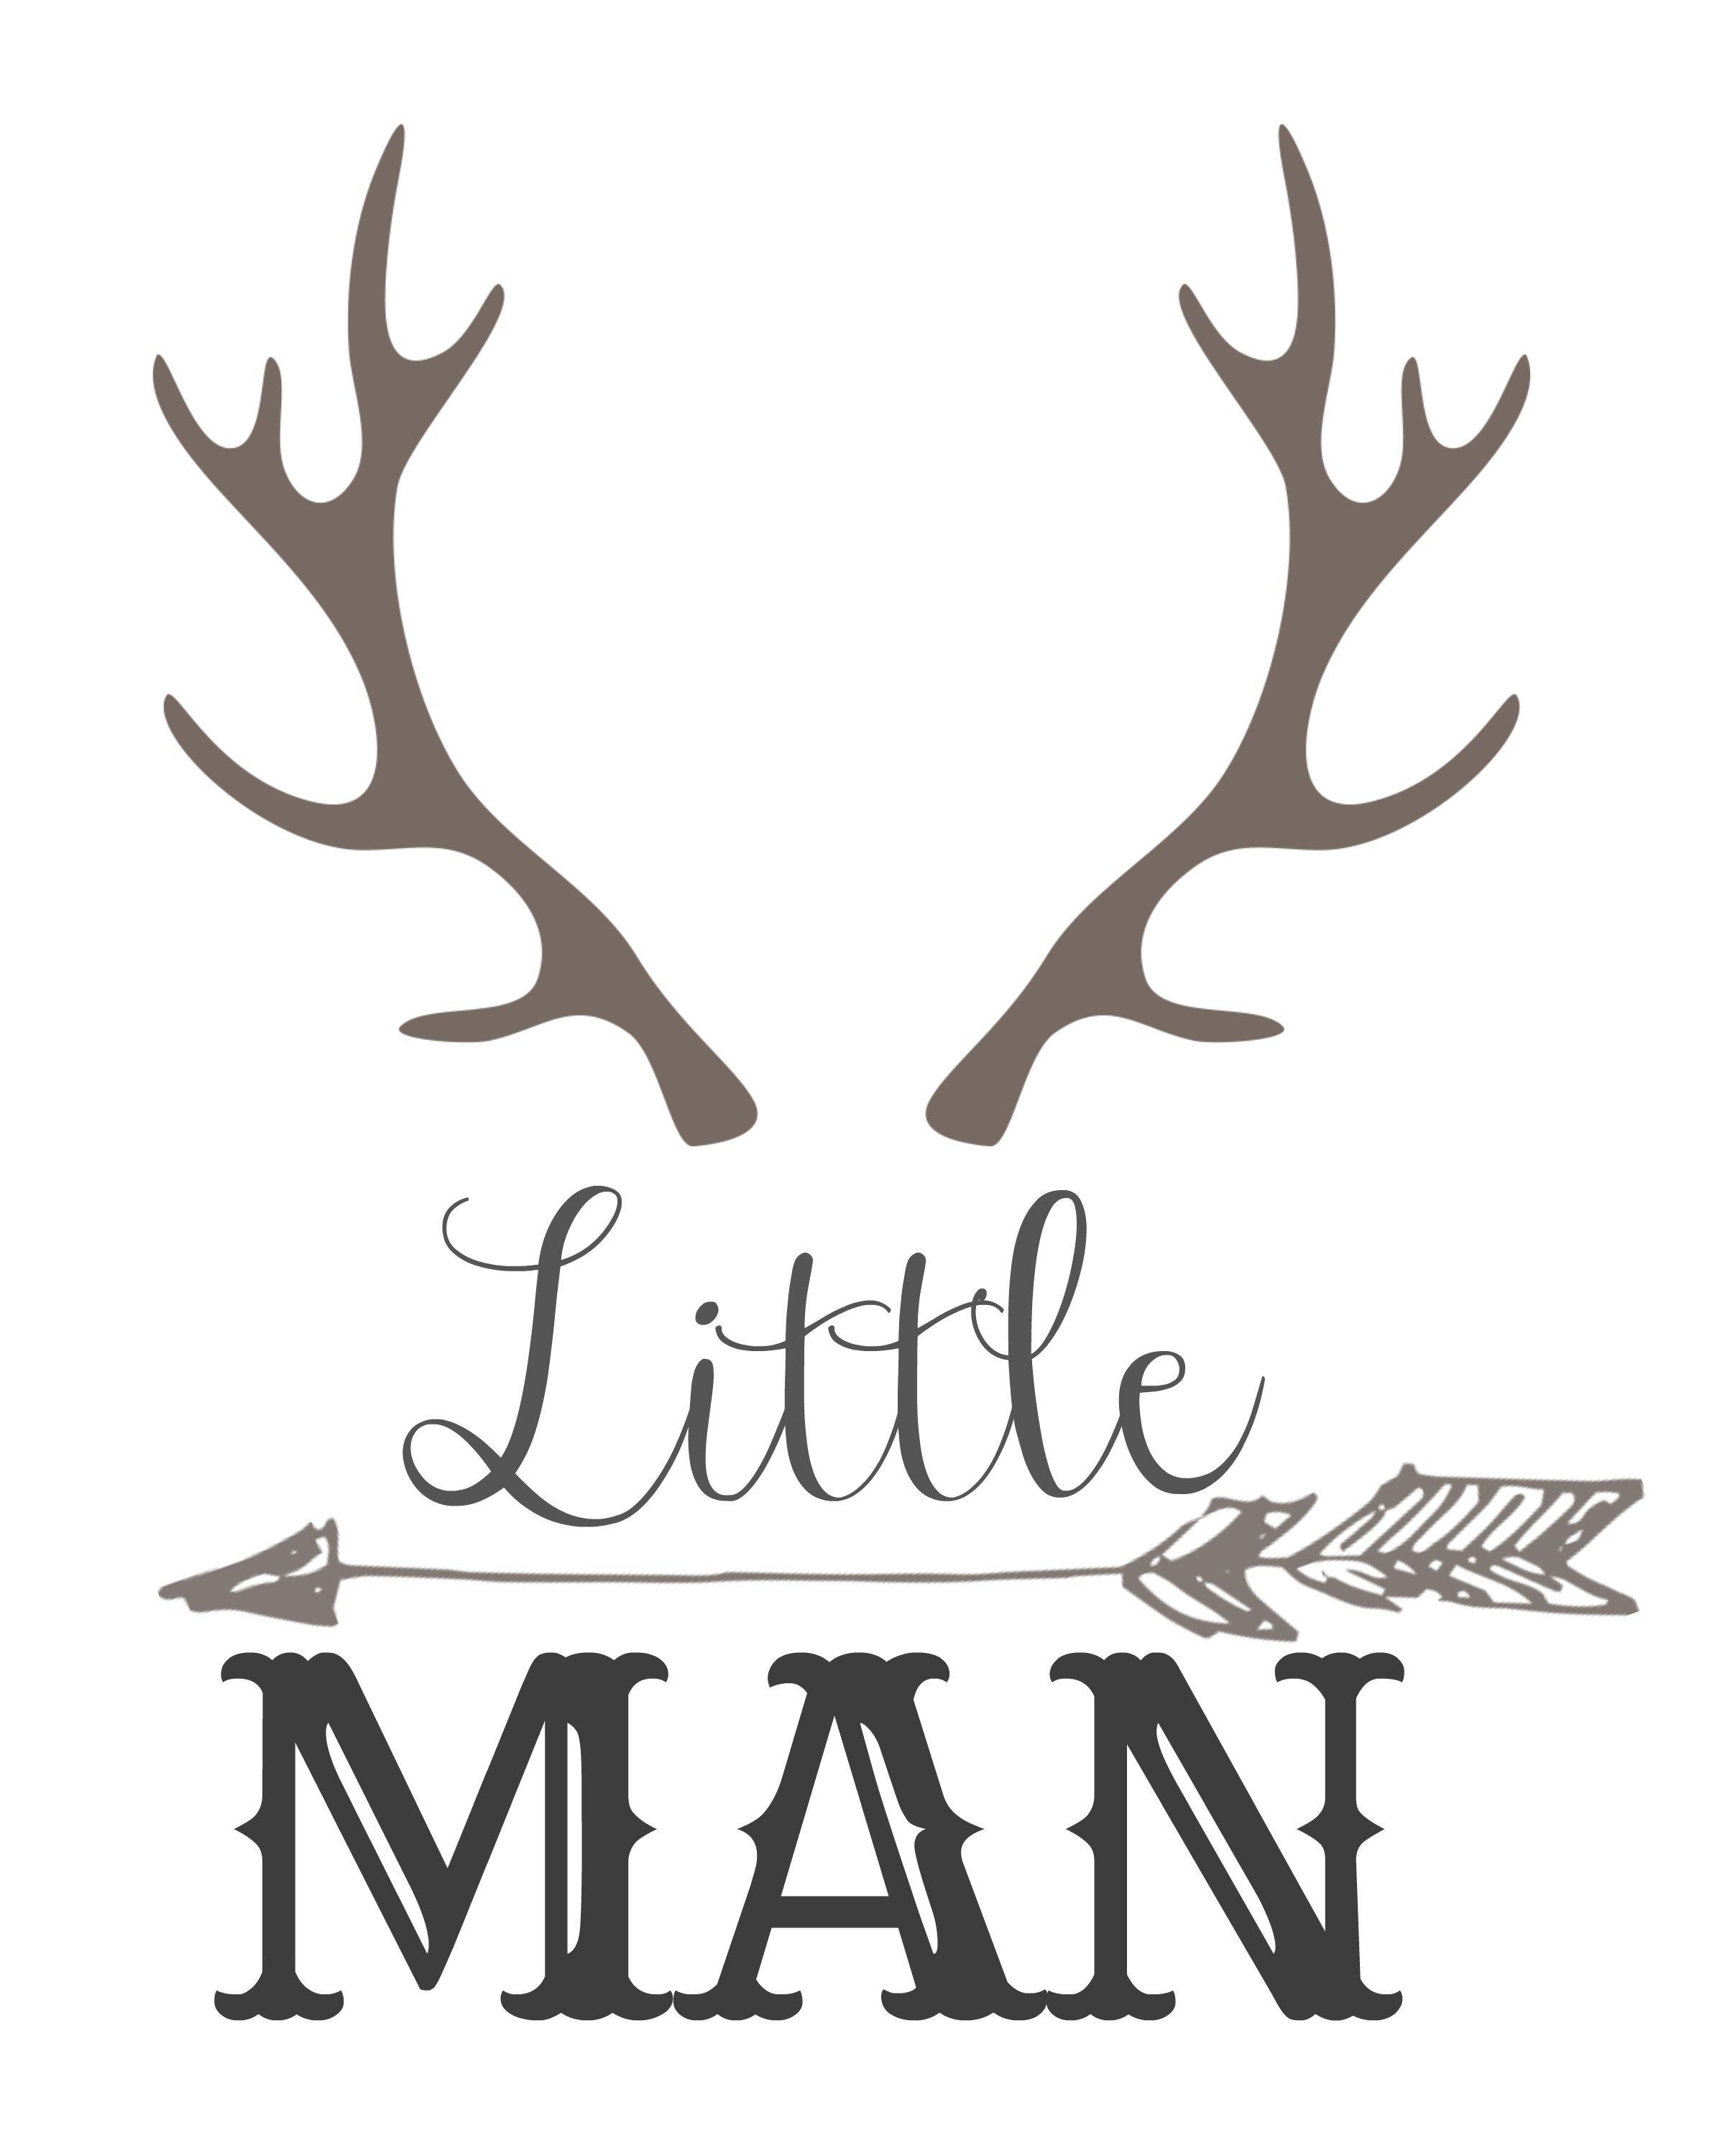 With horns and an. Antlers clipart little man